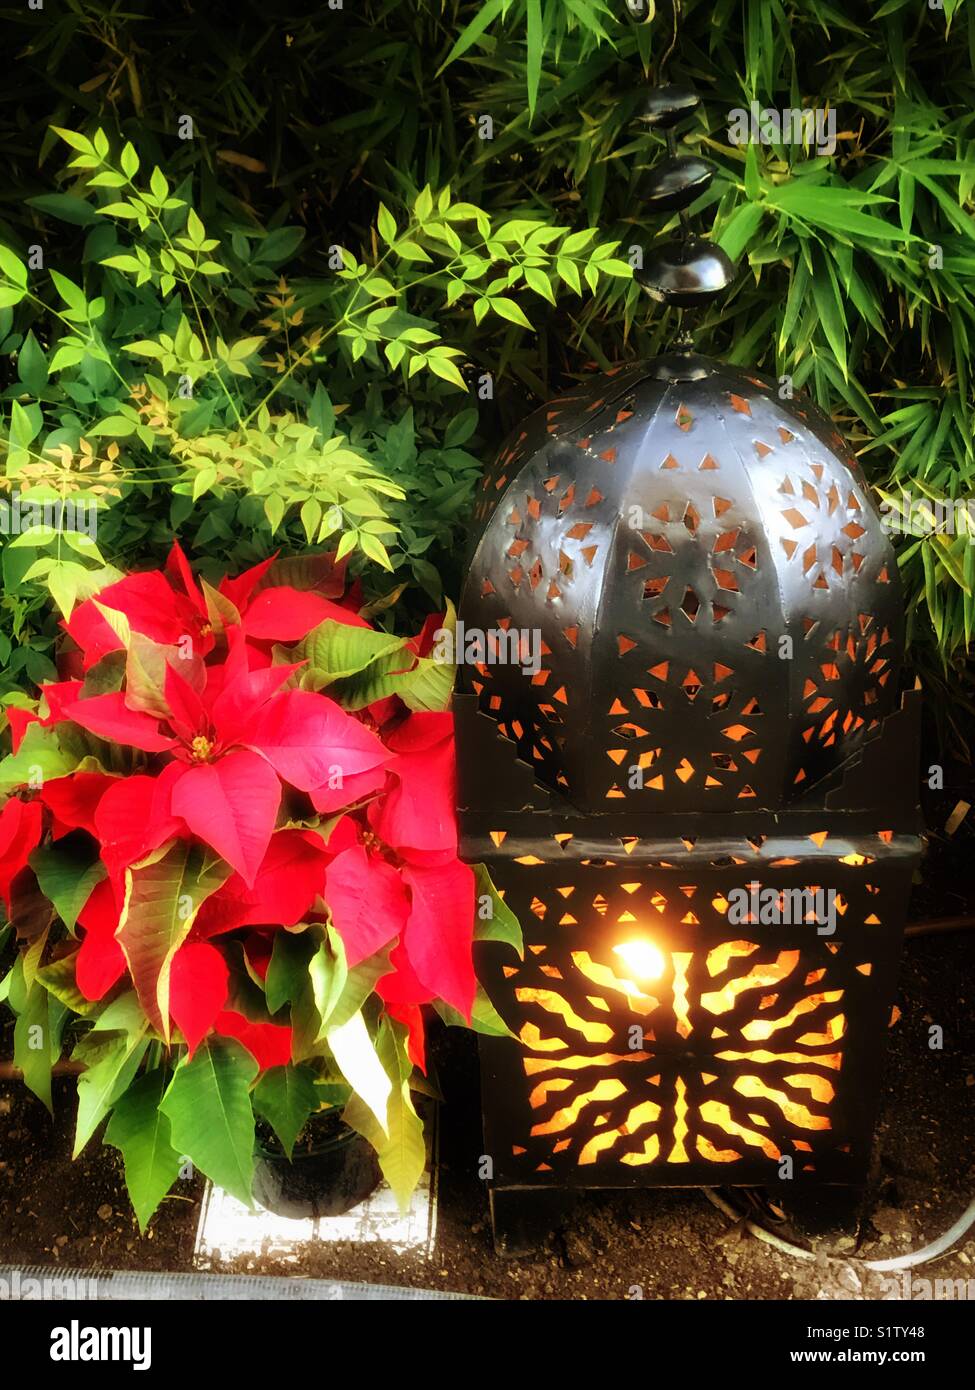 Red poinsettia and lantern Christmas decorations Stock Photo